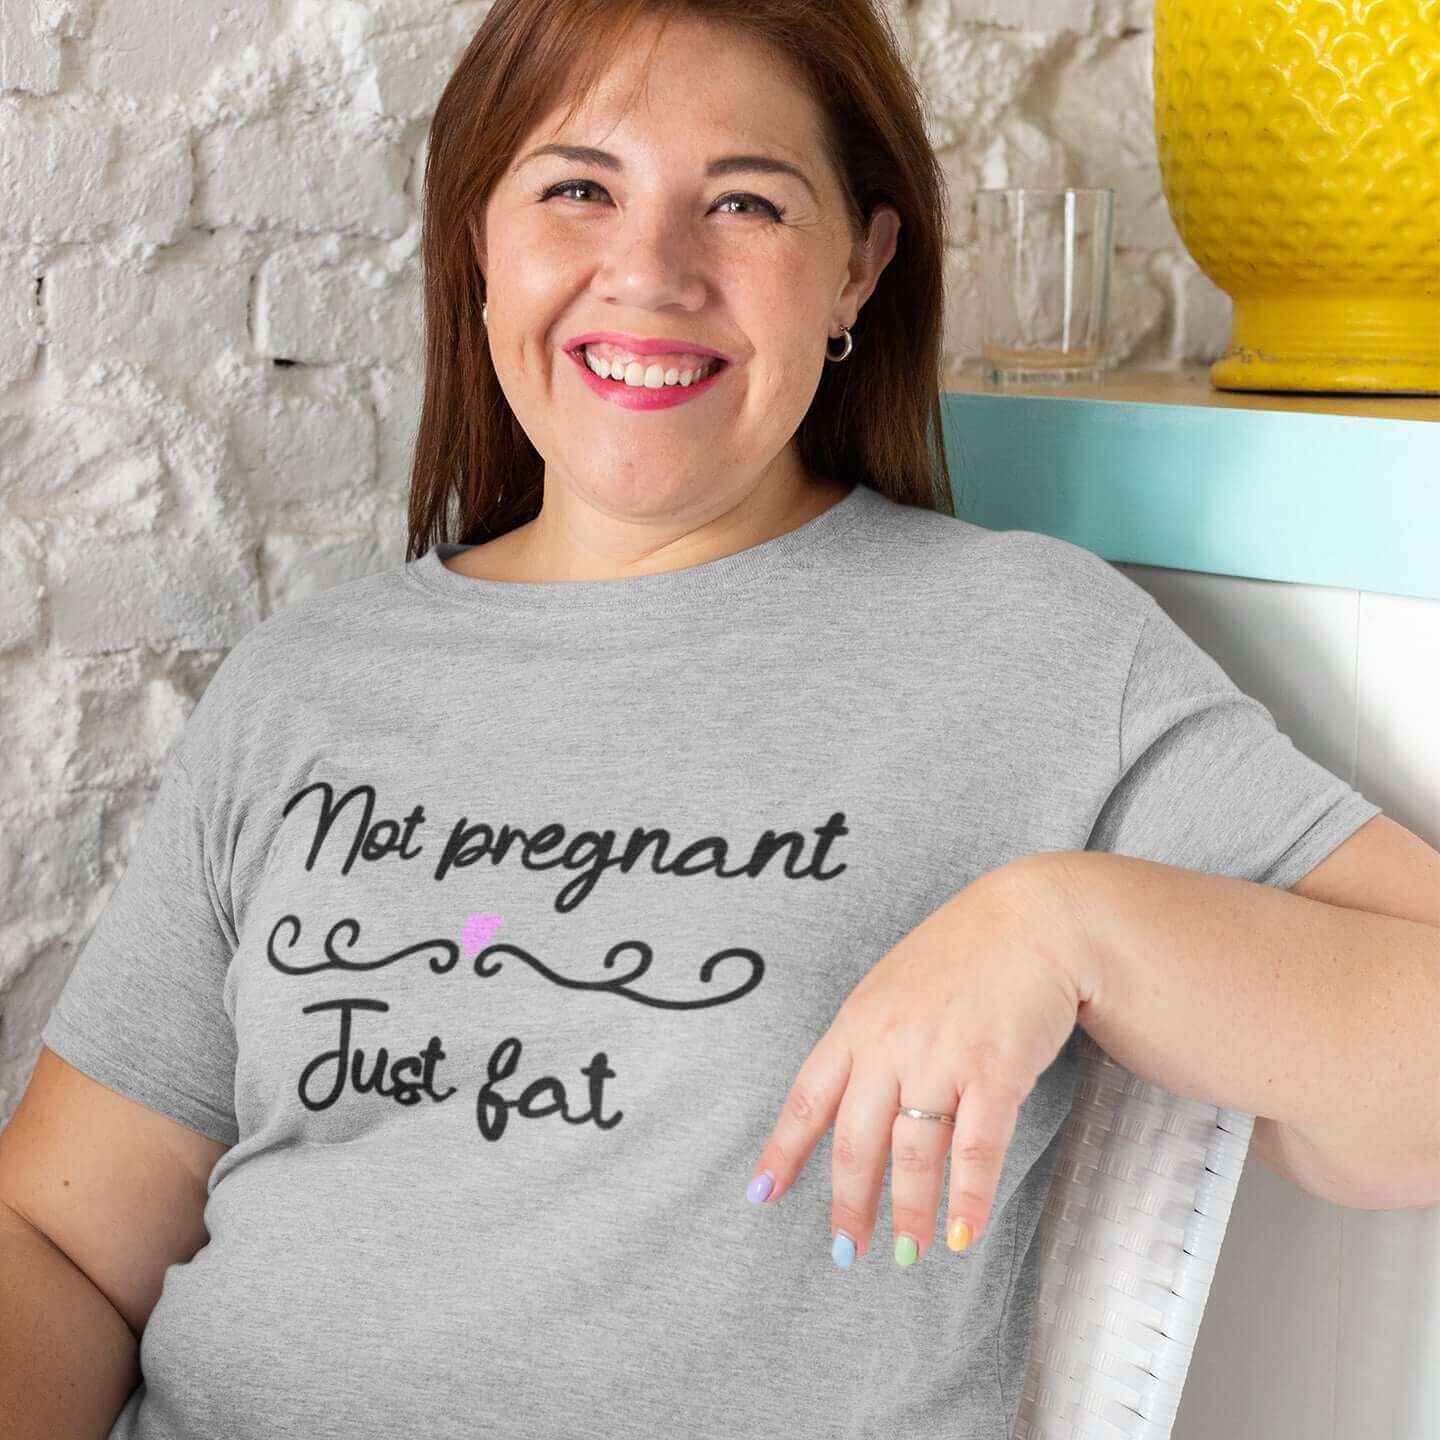 Smiling woman wearing a grey t-shirt with the words Not pregnant just fat printed on the front with a heart.